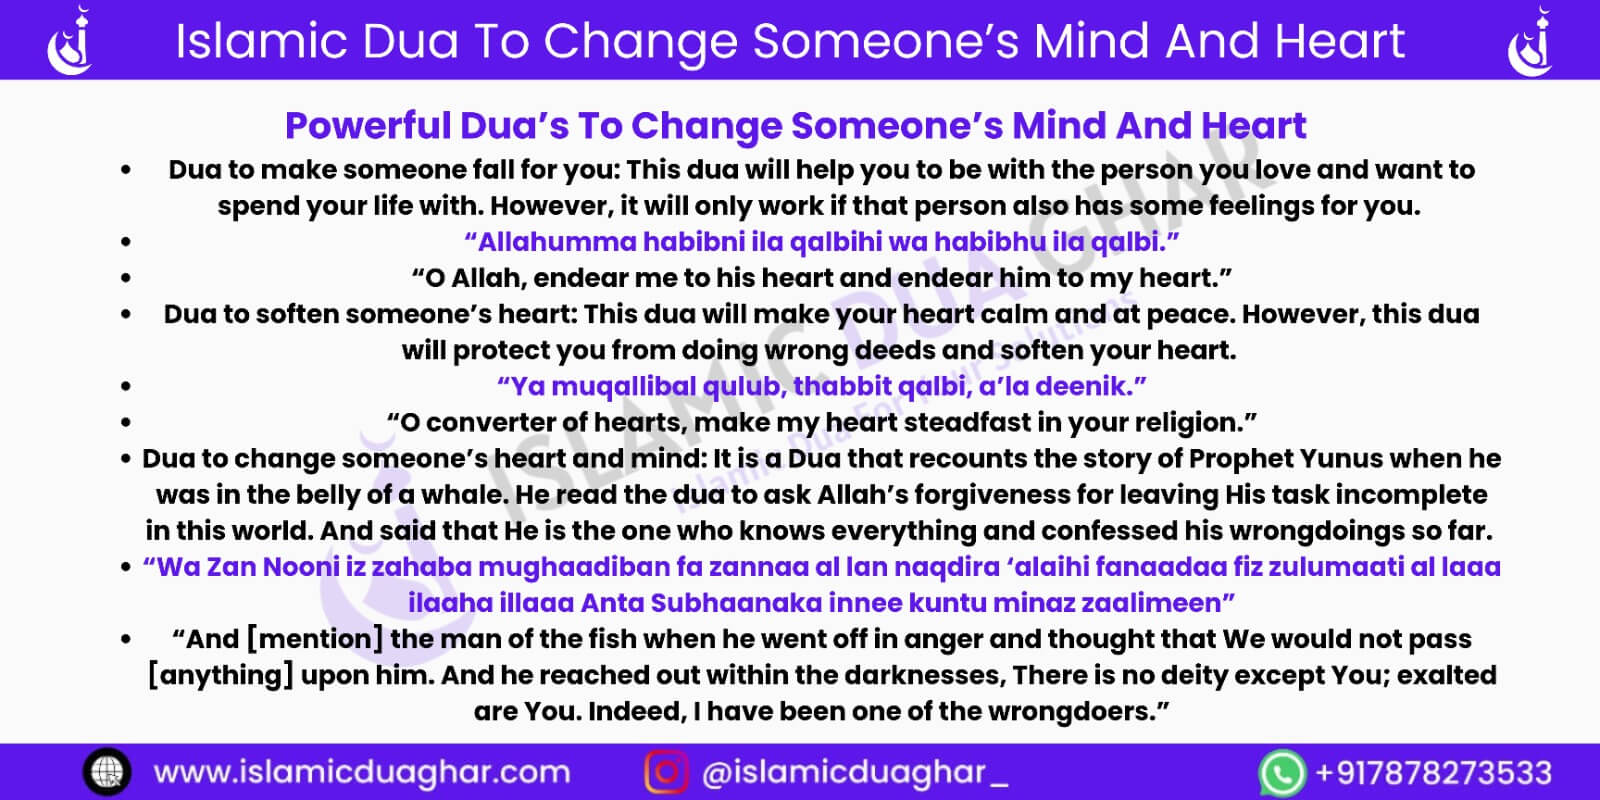 Dua To Change Someone’s Mind And Heart